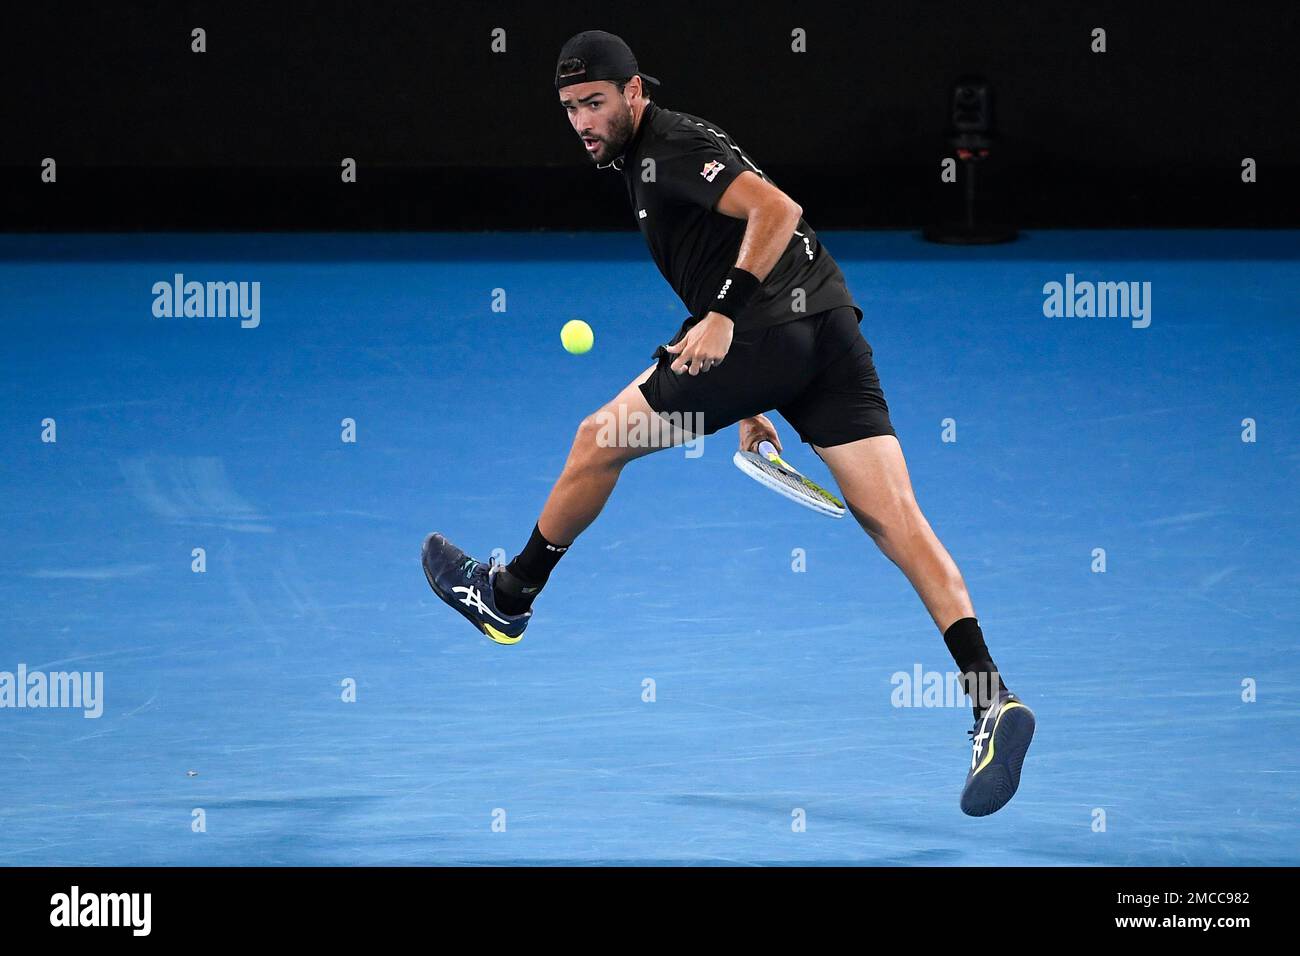 Matteo Berrettini of Italy plays a shot between his legs to Gael Monfils of France during their quarterfinal match at the Australian Open tennis championships in Melbourne, Australia, Tuesday, Jan